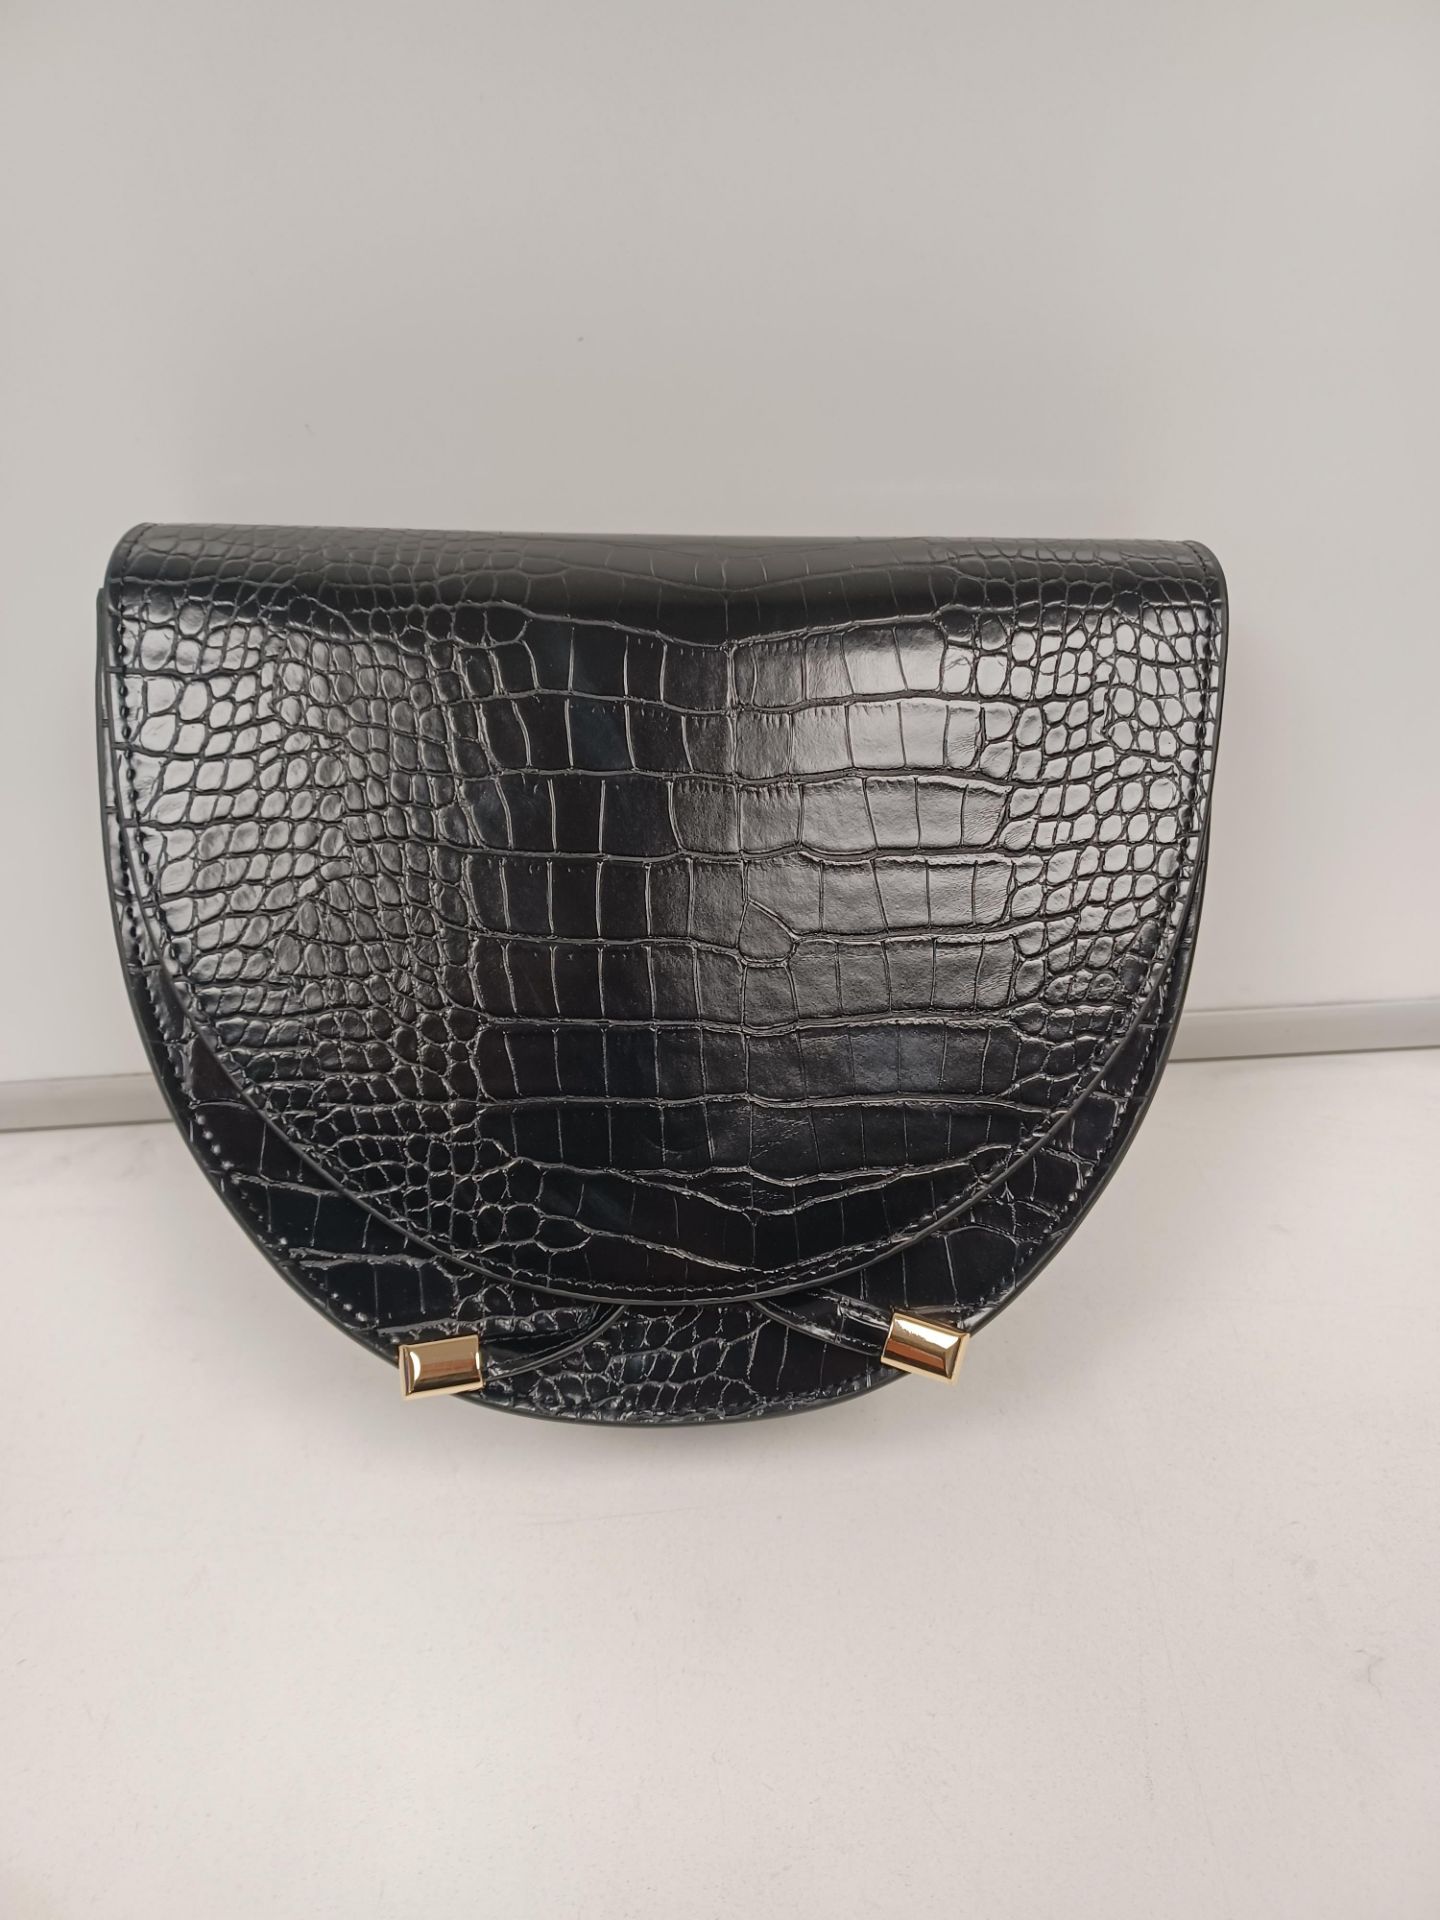 5 X NEW PACKAGED BEAUTIFY LEATHER EFFECT SNAKE SKIN SHOULDER BAGS. RRP £55 EACH. ROW 1